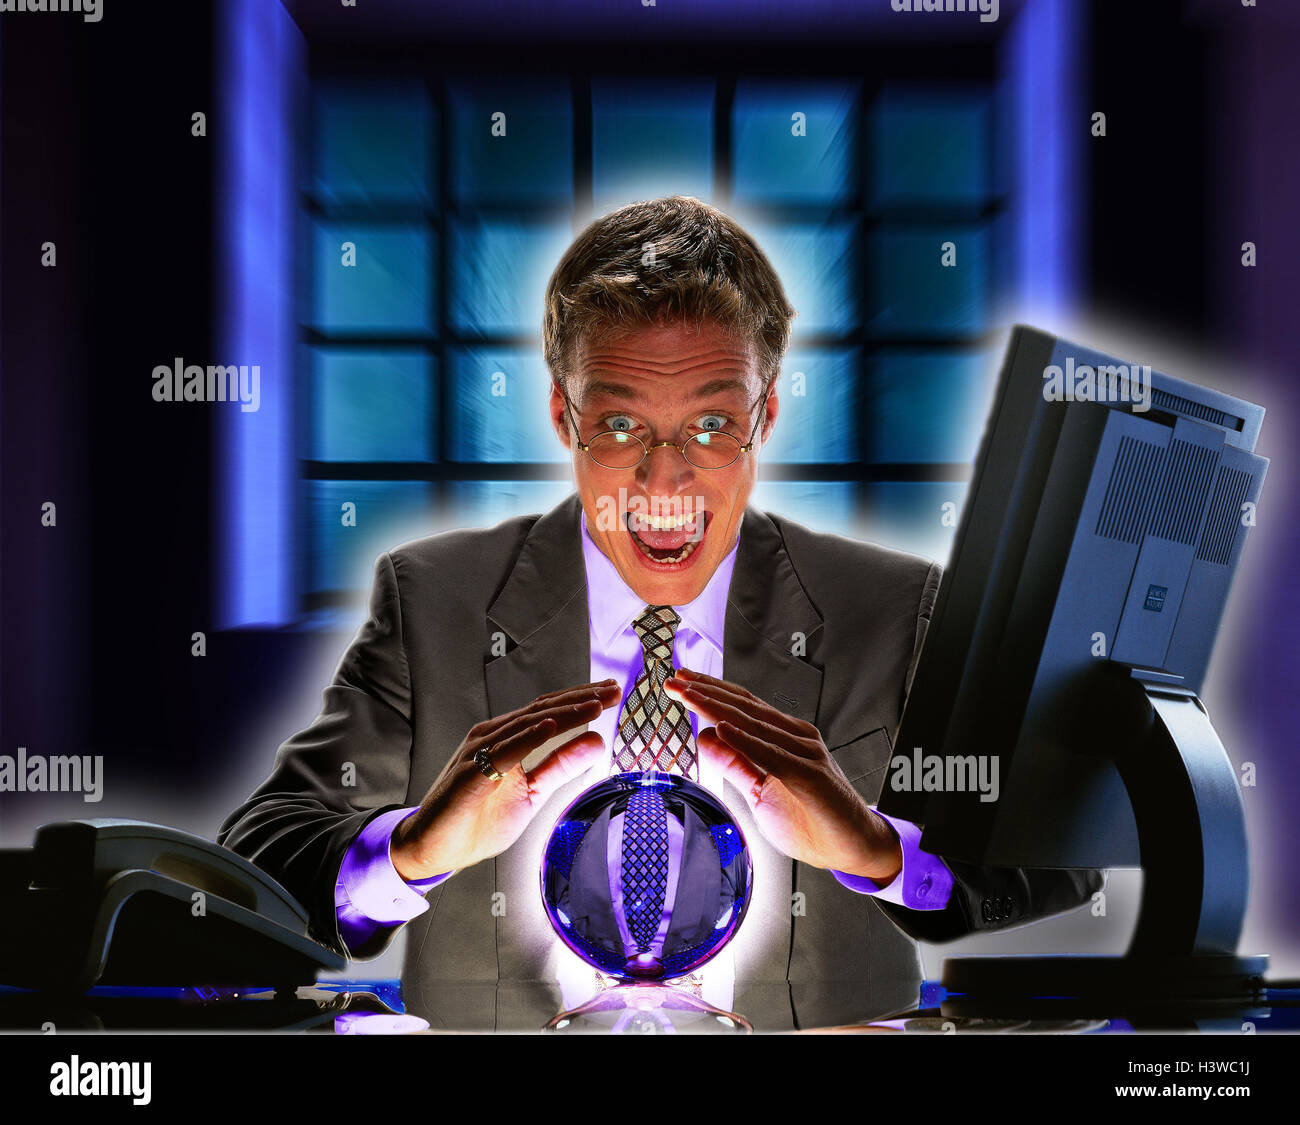 Composing, office, man, desk, crystal ball, swear, facial play, joy concepts, businessman, esotericism, spiritualism, clairvoyance, clairvoyant, foreteller, tell fortunes, invocation, future, success, enthusiasm, joy Stock Photo